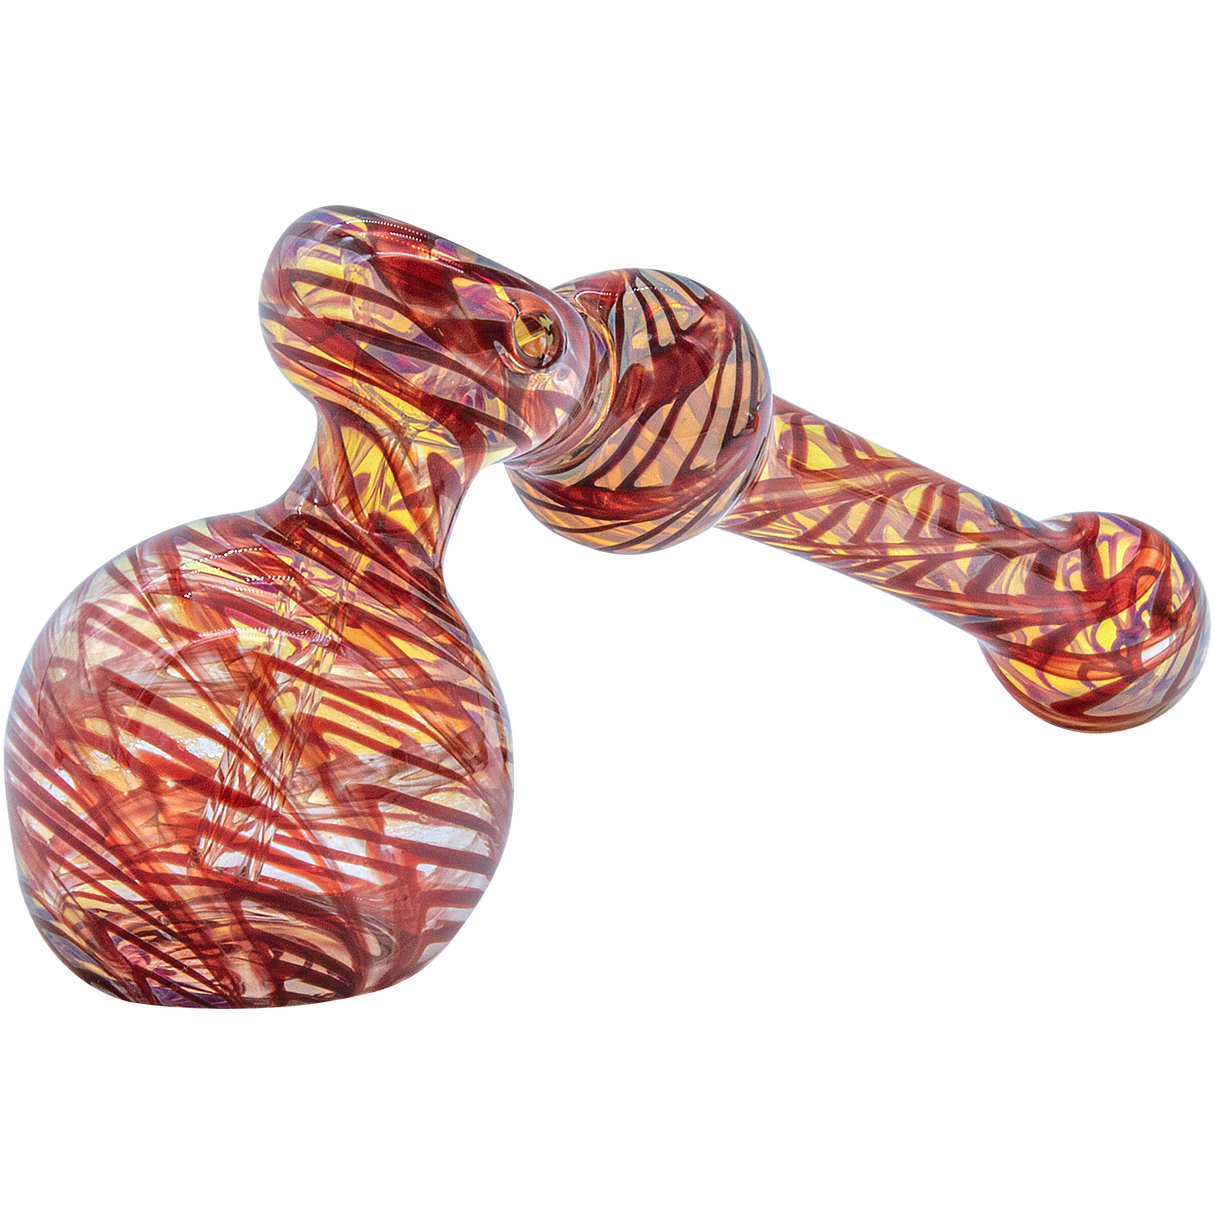 LA Pipes "Full Rake" Fumed Hammer Bubbler Pipe in Ruby Red, 6" Borosilicate Glass, USA Made